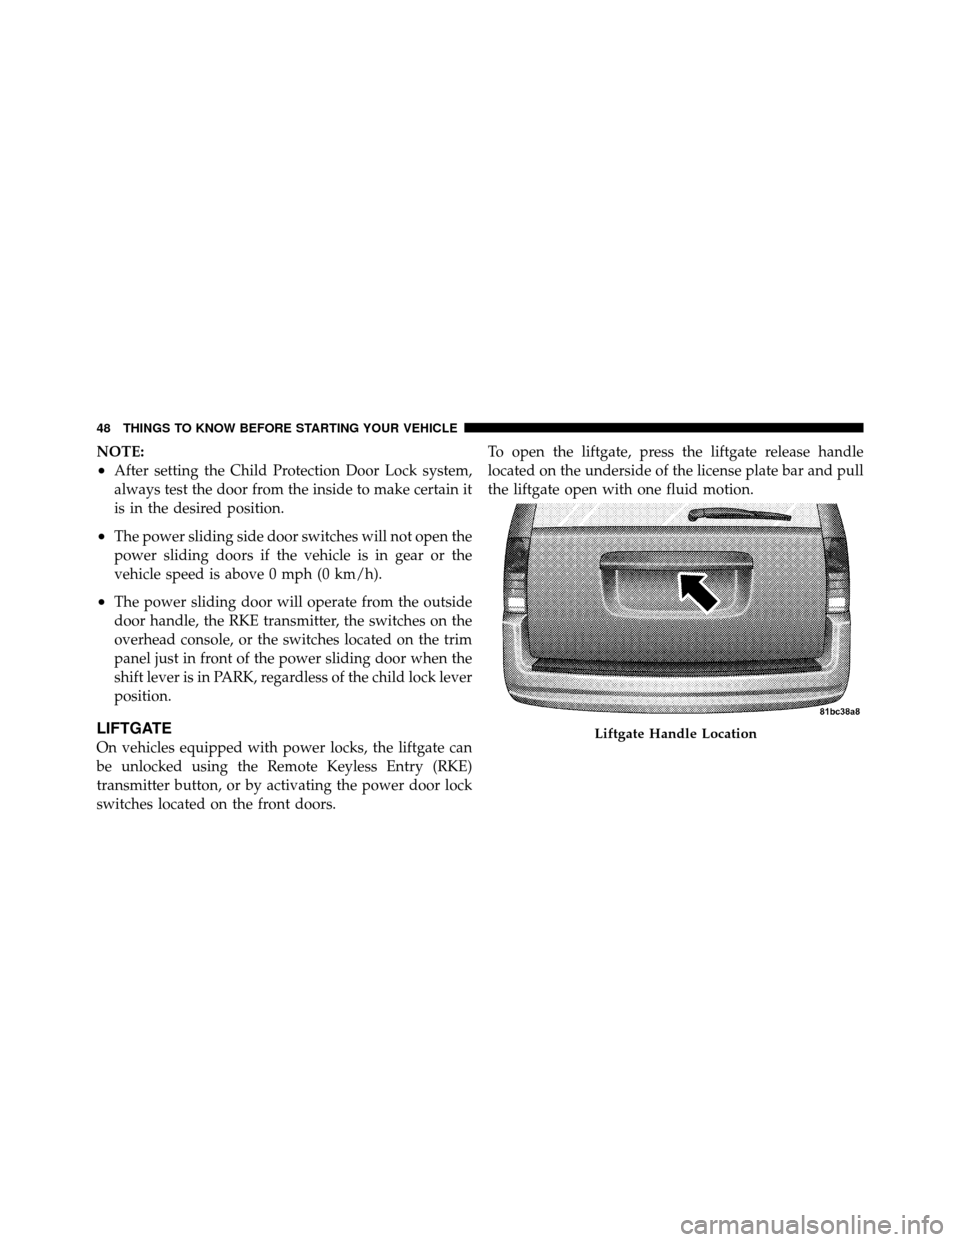 CHRYSLER TOWN AND COUNTRY 2010 5.G User Guide NOTE:
•After setting the Child Protection Door Lock system,
always test the door from the inside to make certain it
is in the desired position.
•The power sliding side door switches will not open 